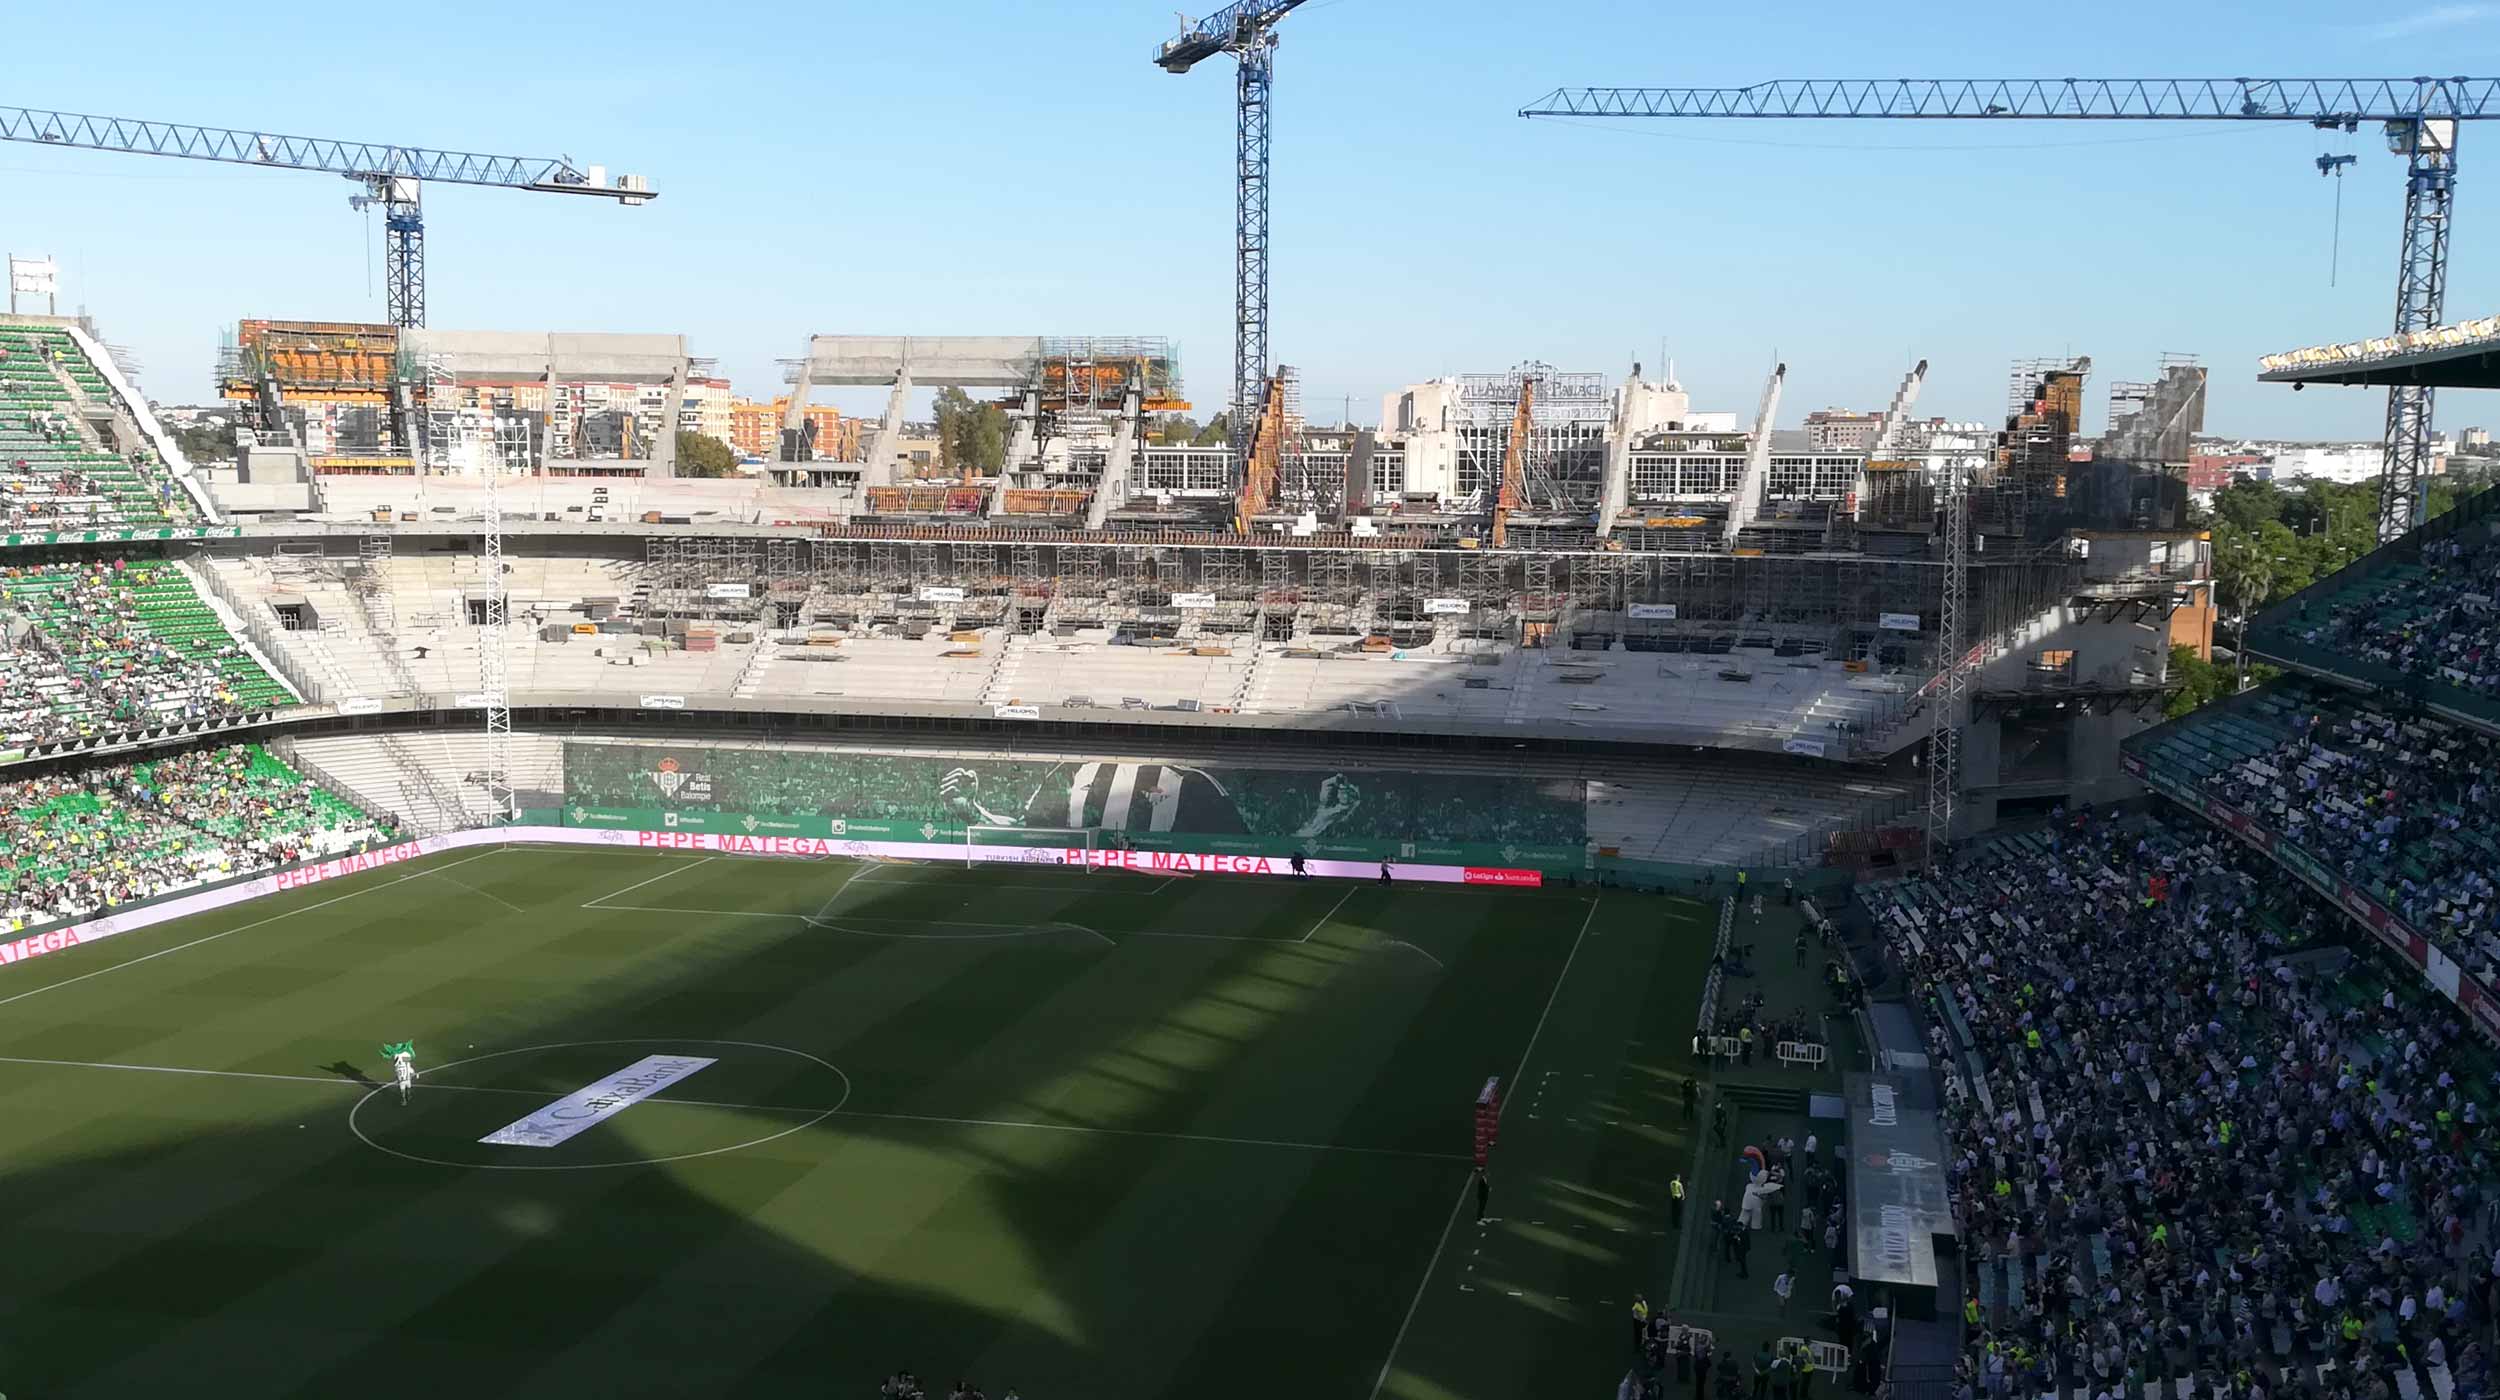 The construction of the south grandstand for the Benito Villamarín Stadium in Sevilla, Spain.